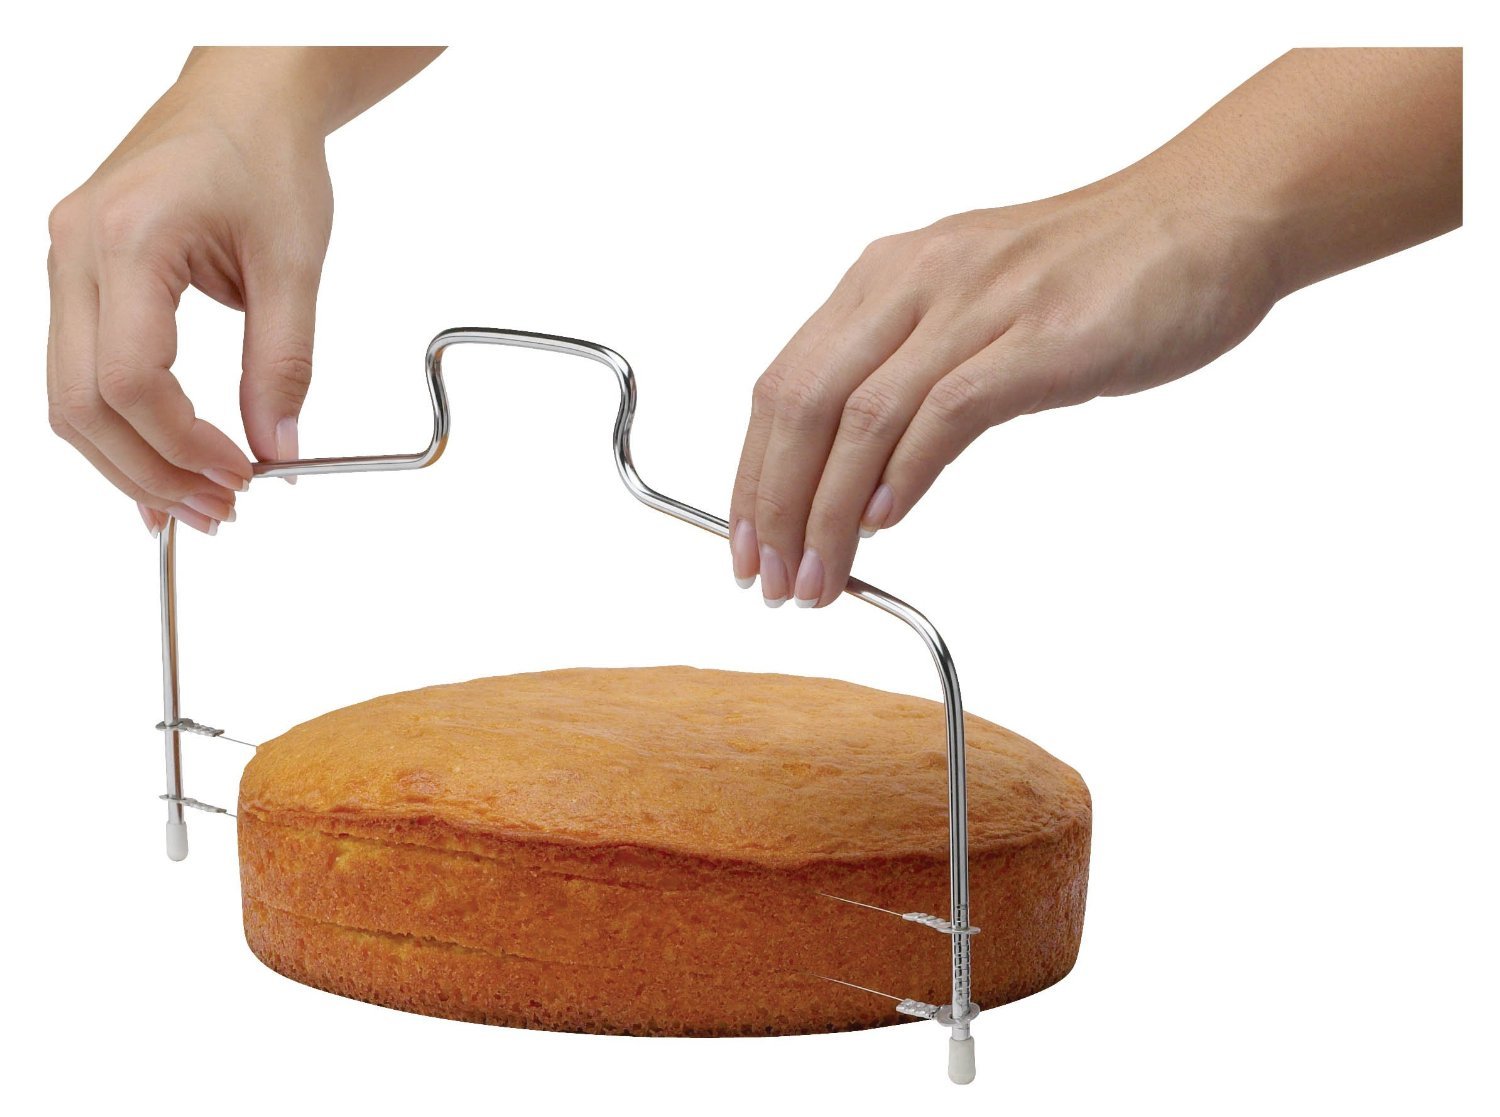 2 layer wire cake cutter cutting a cake with two hands holding it